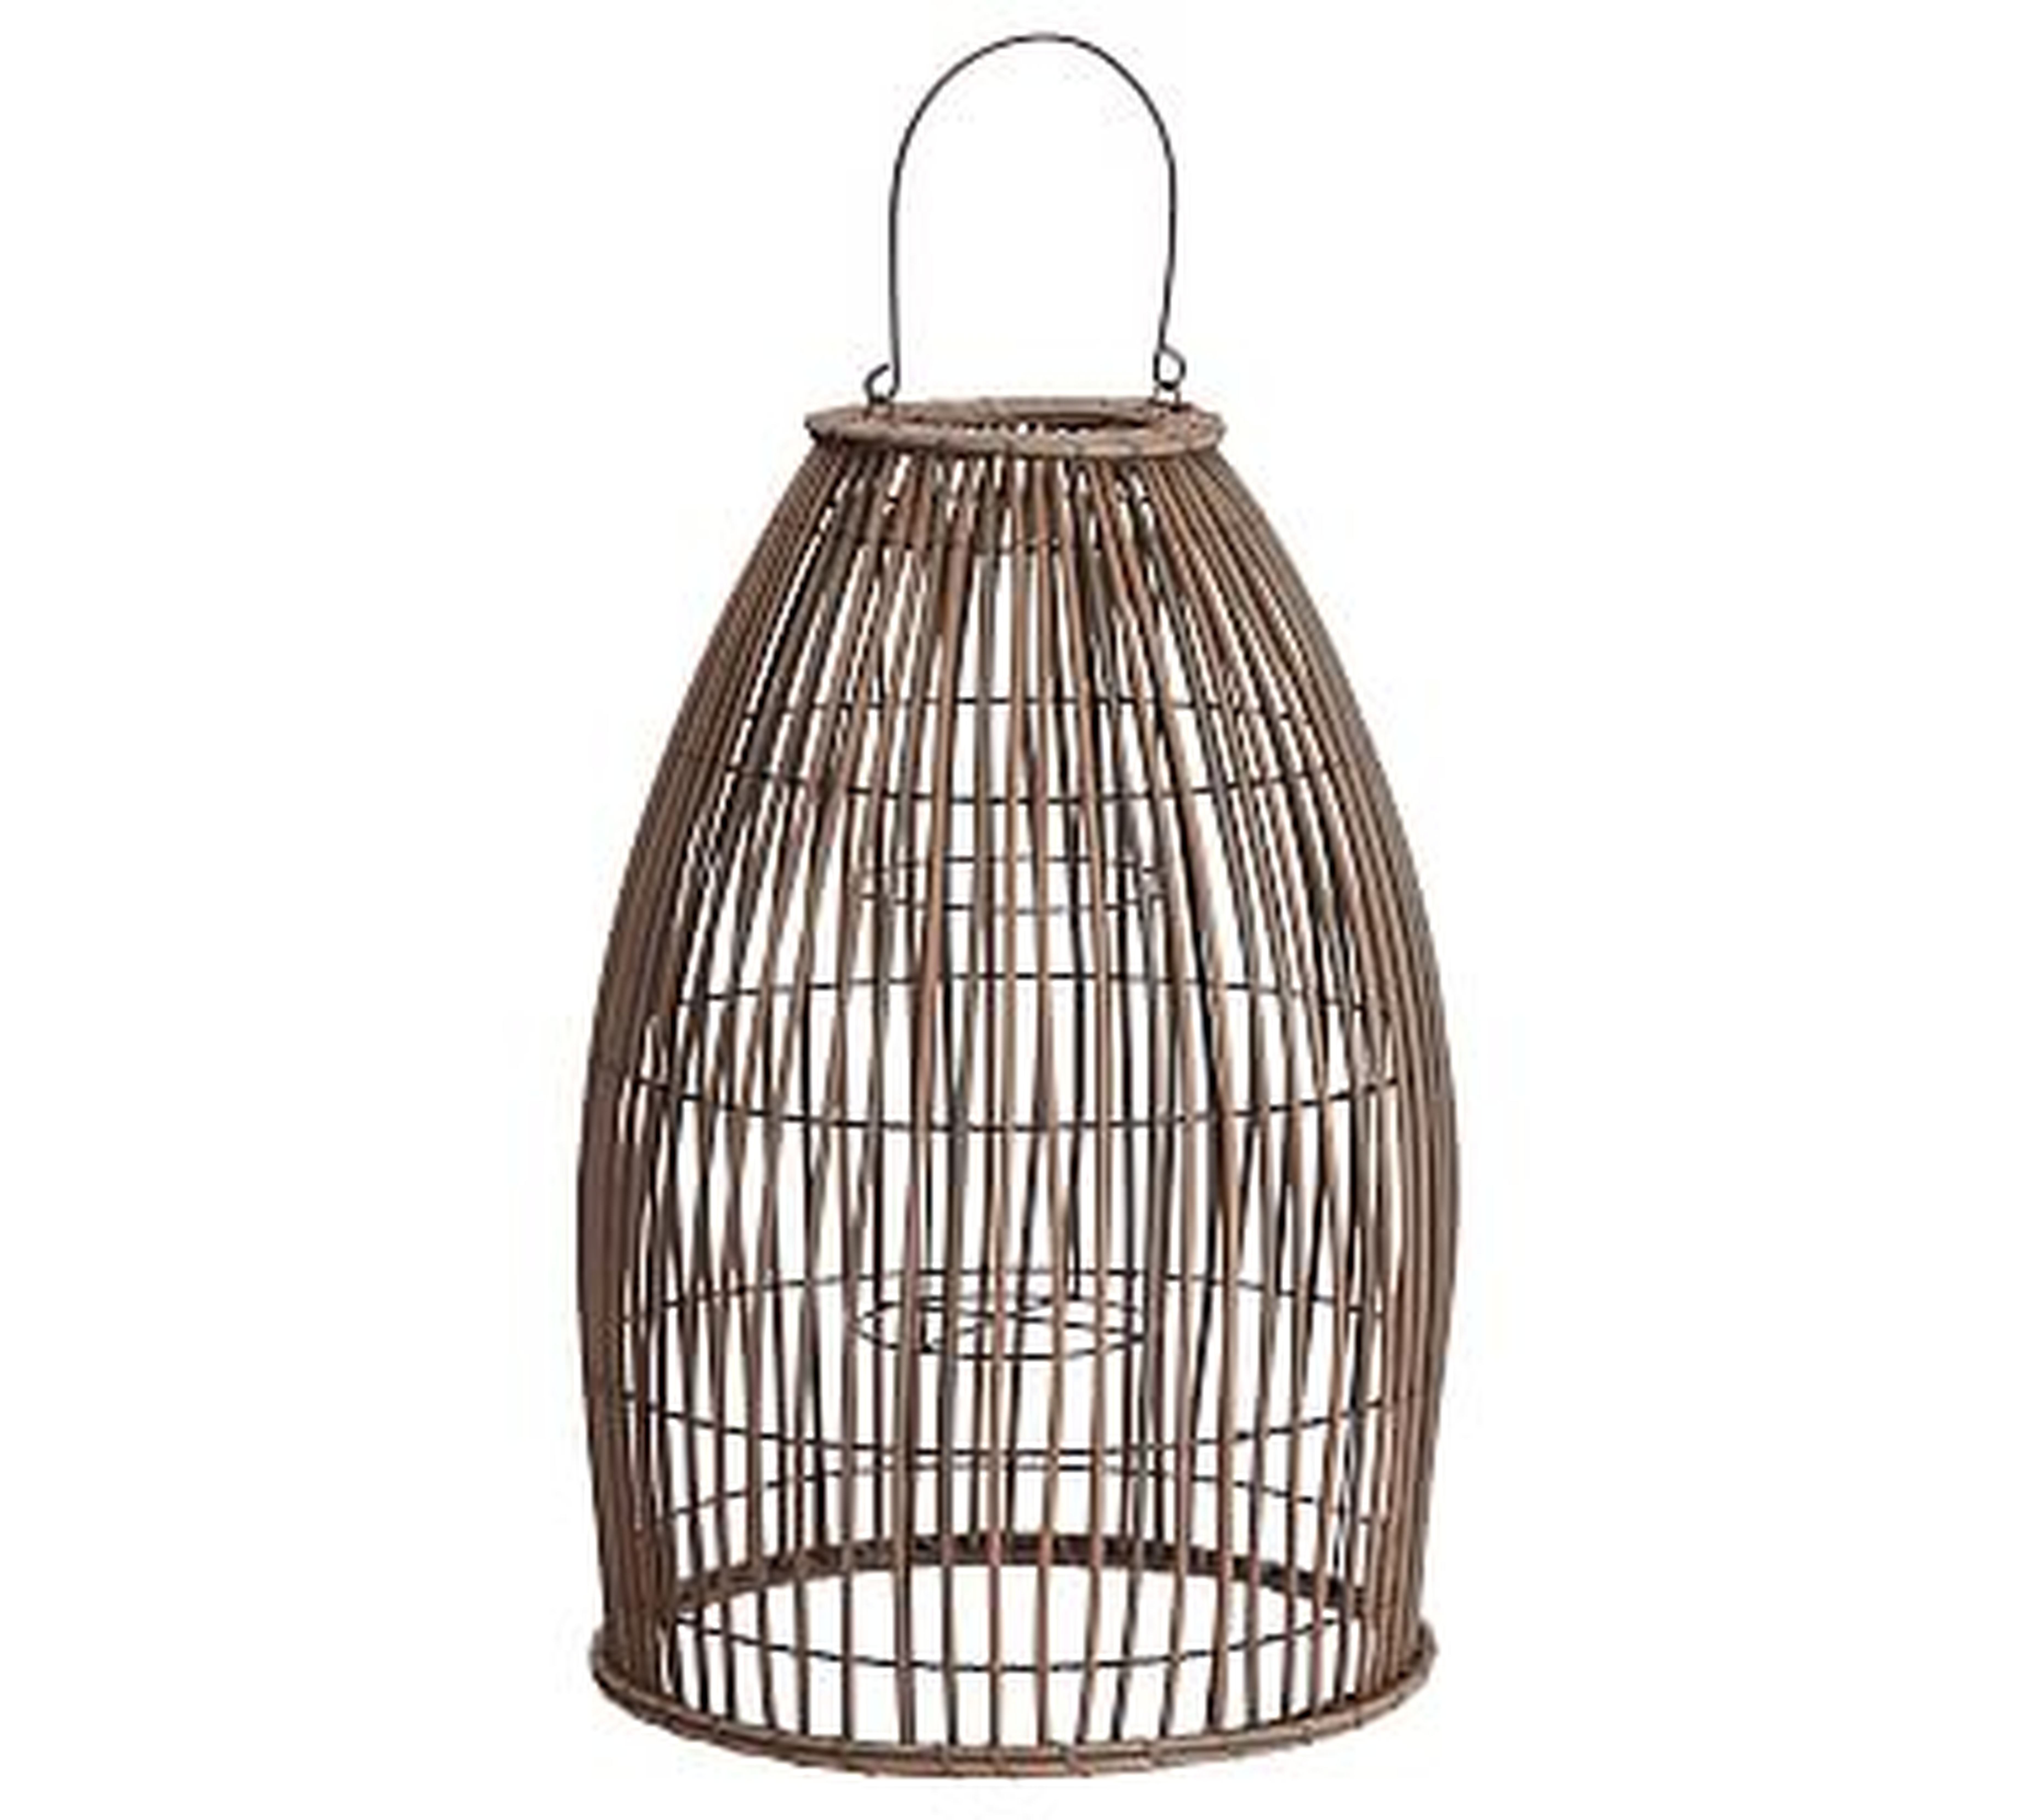 Careyes All-Weather Outdoor Wicker Lantern, Grey - Large - Pottery Barn